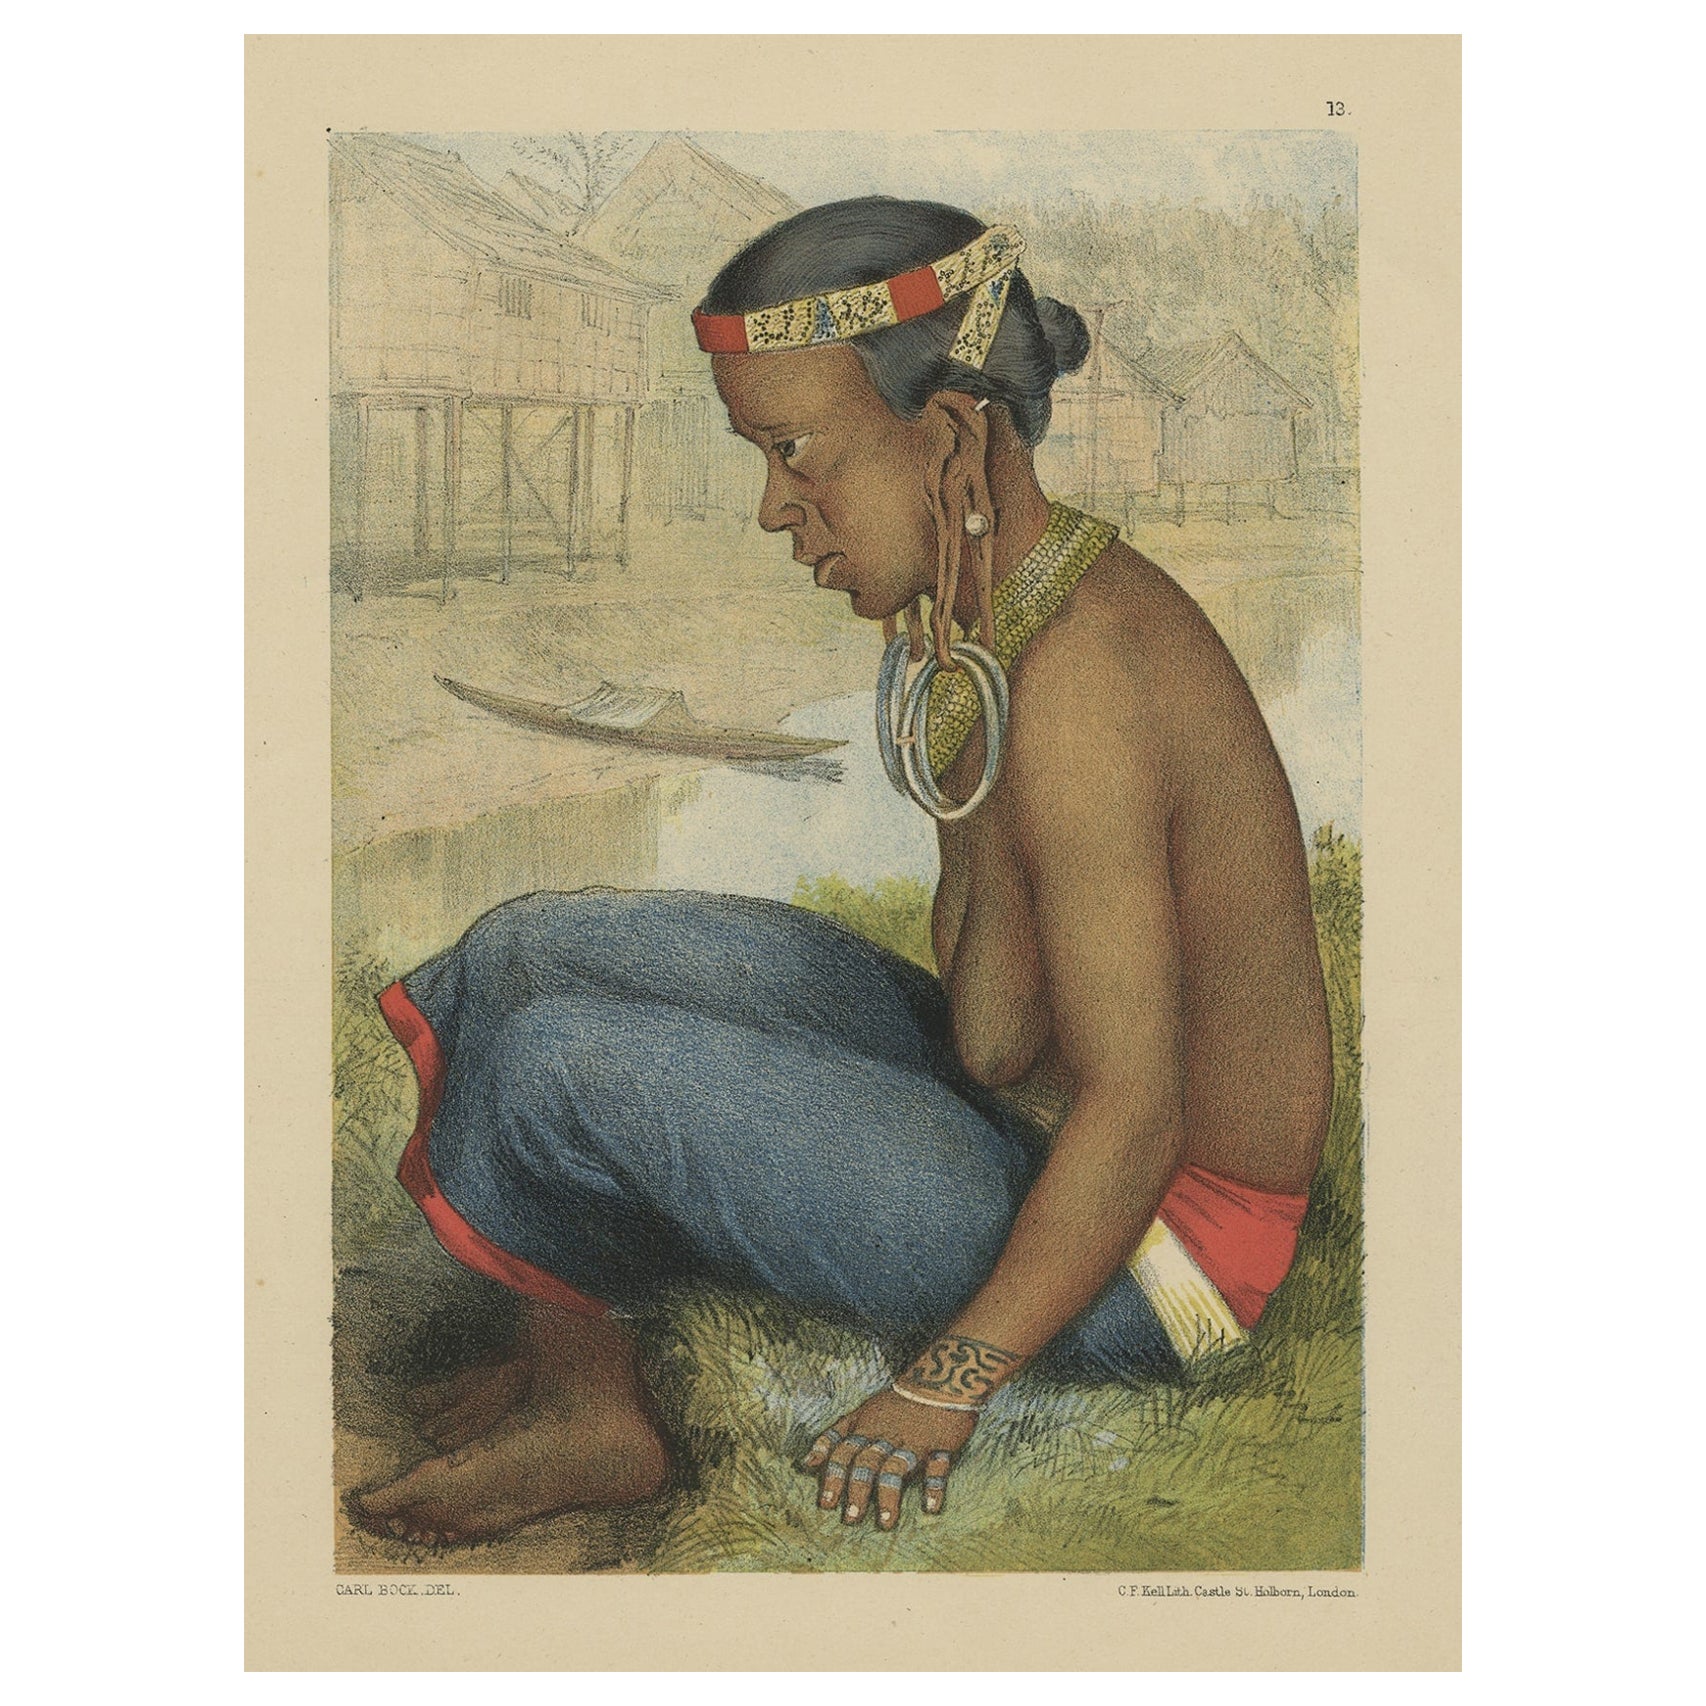 Antique Print of a Tring Dayak Woman from Borneo Island, Indonesia, 1881